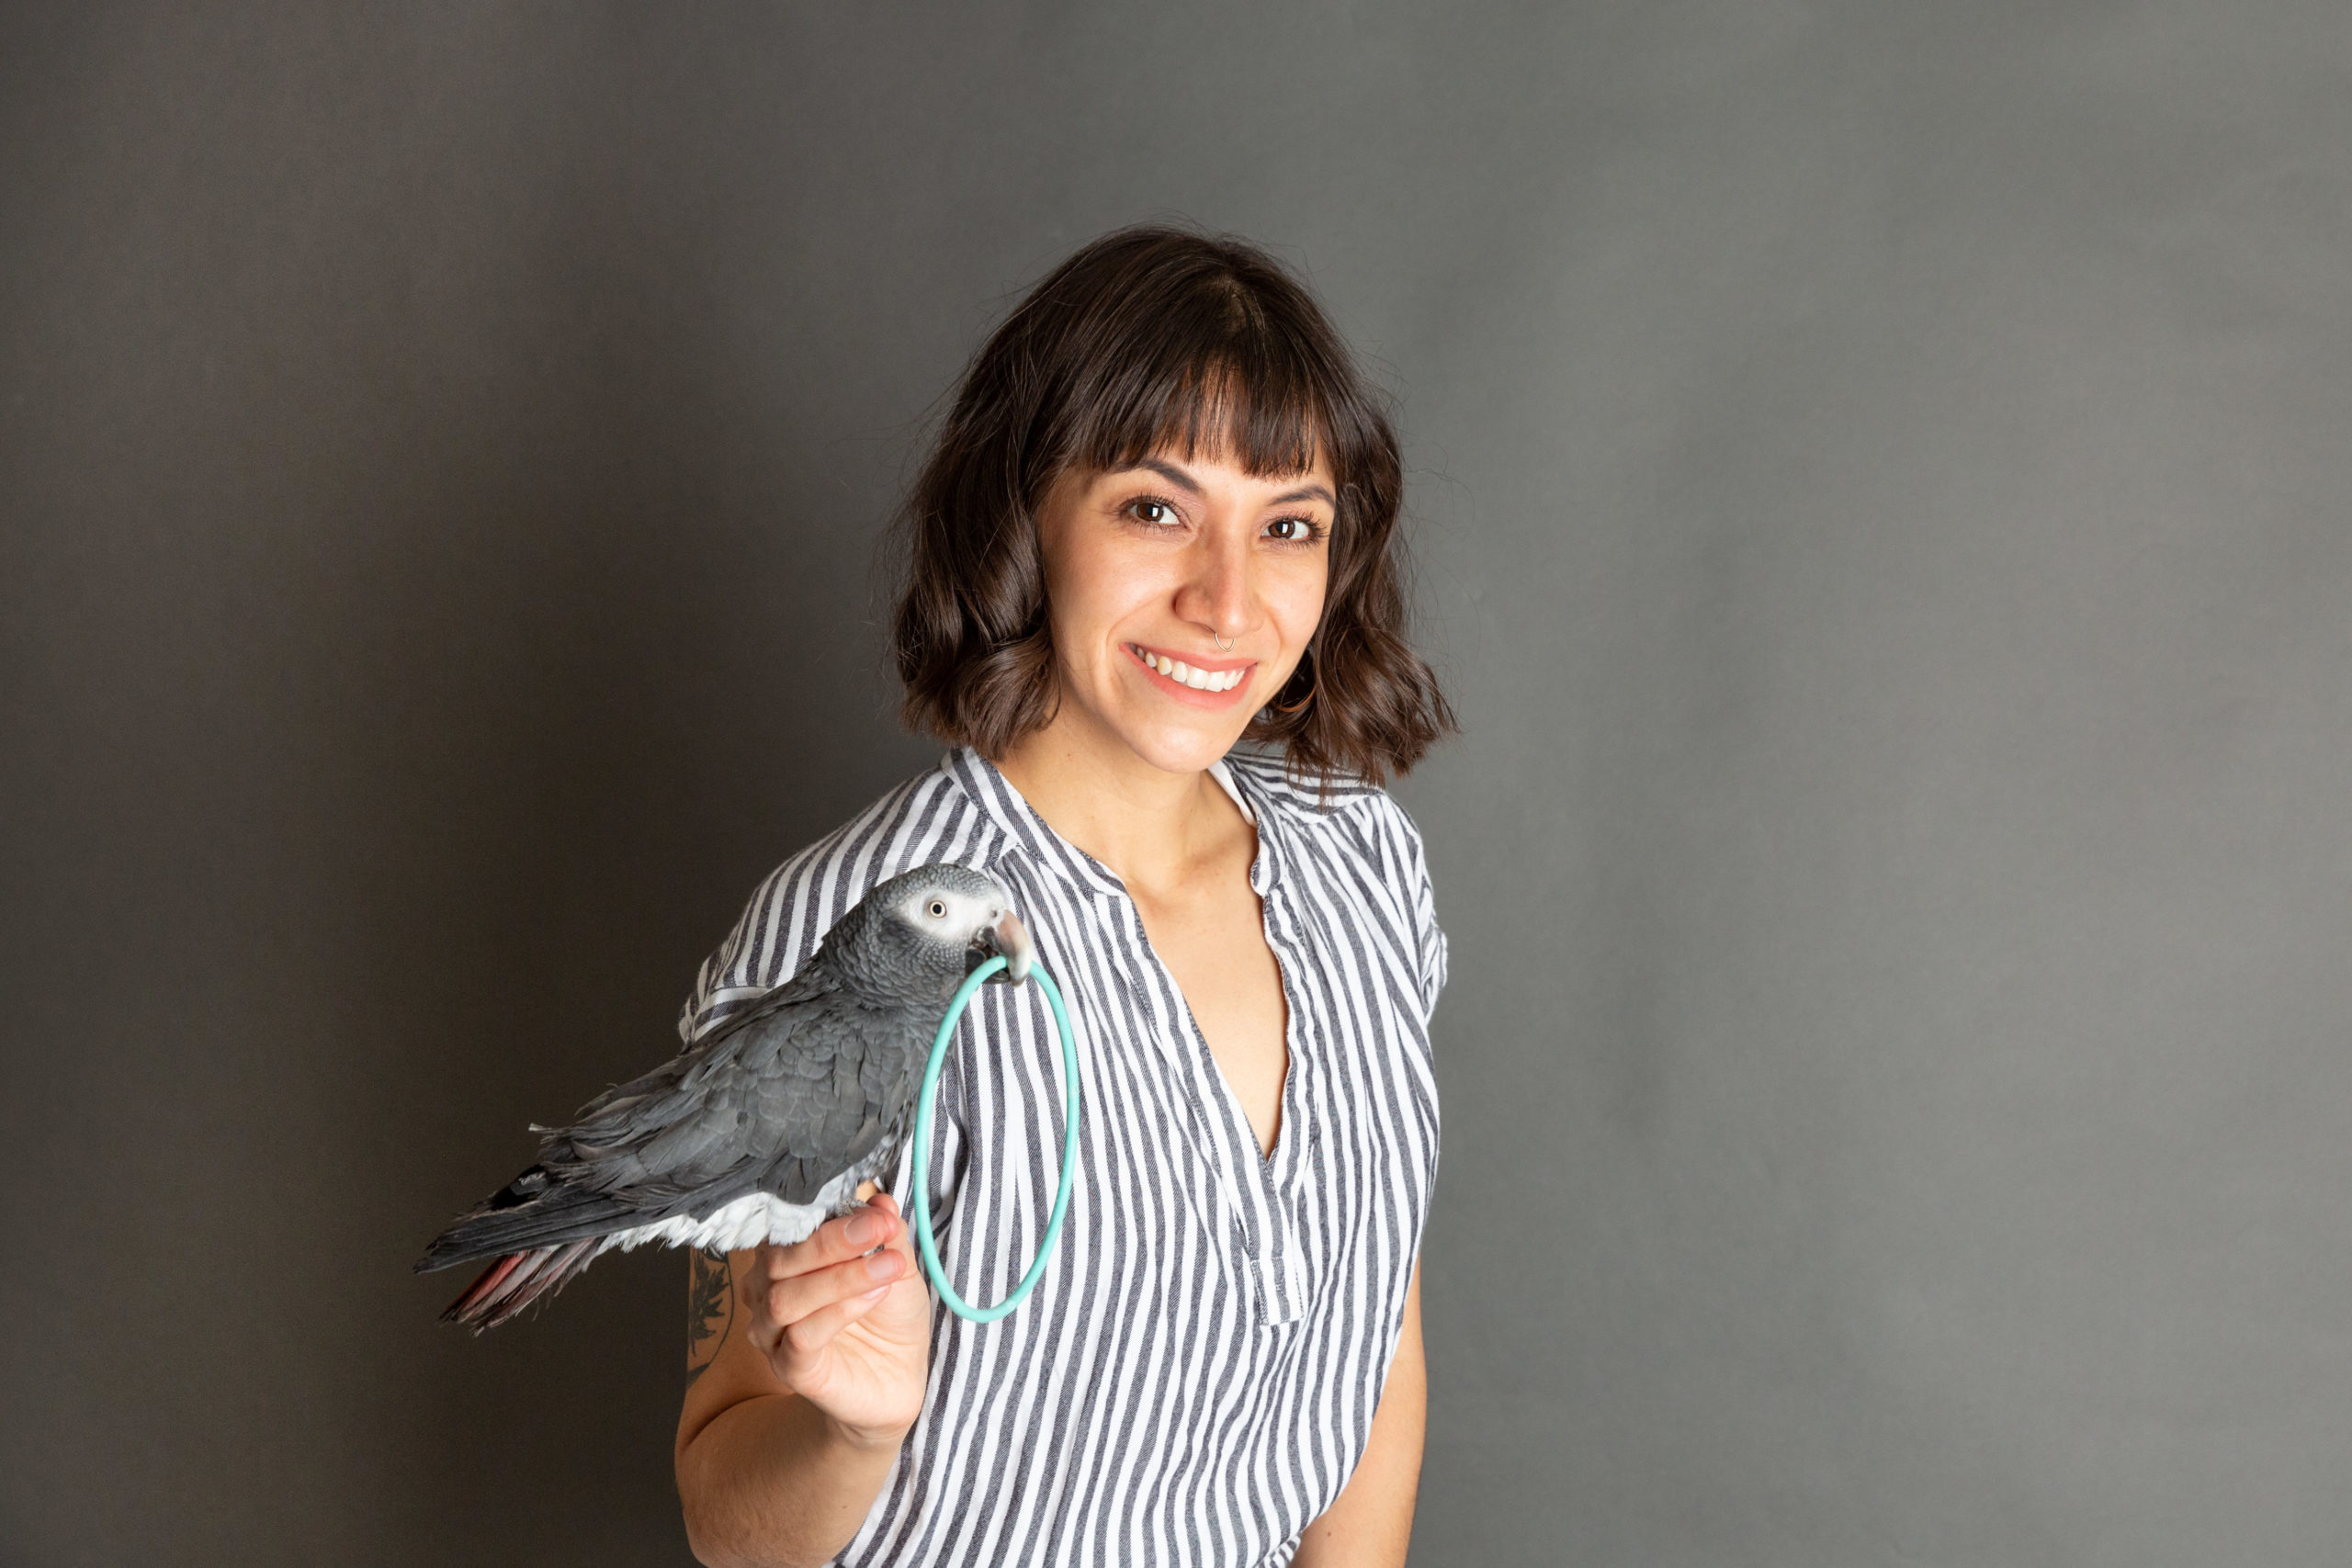 Amelia, with shoulder-length brown hair and a striped shirt smiles with a parrot posed on her hand.